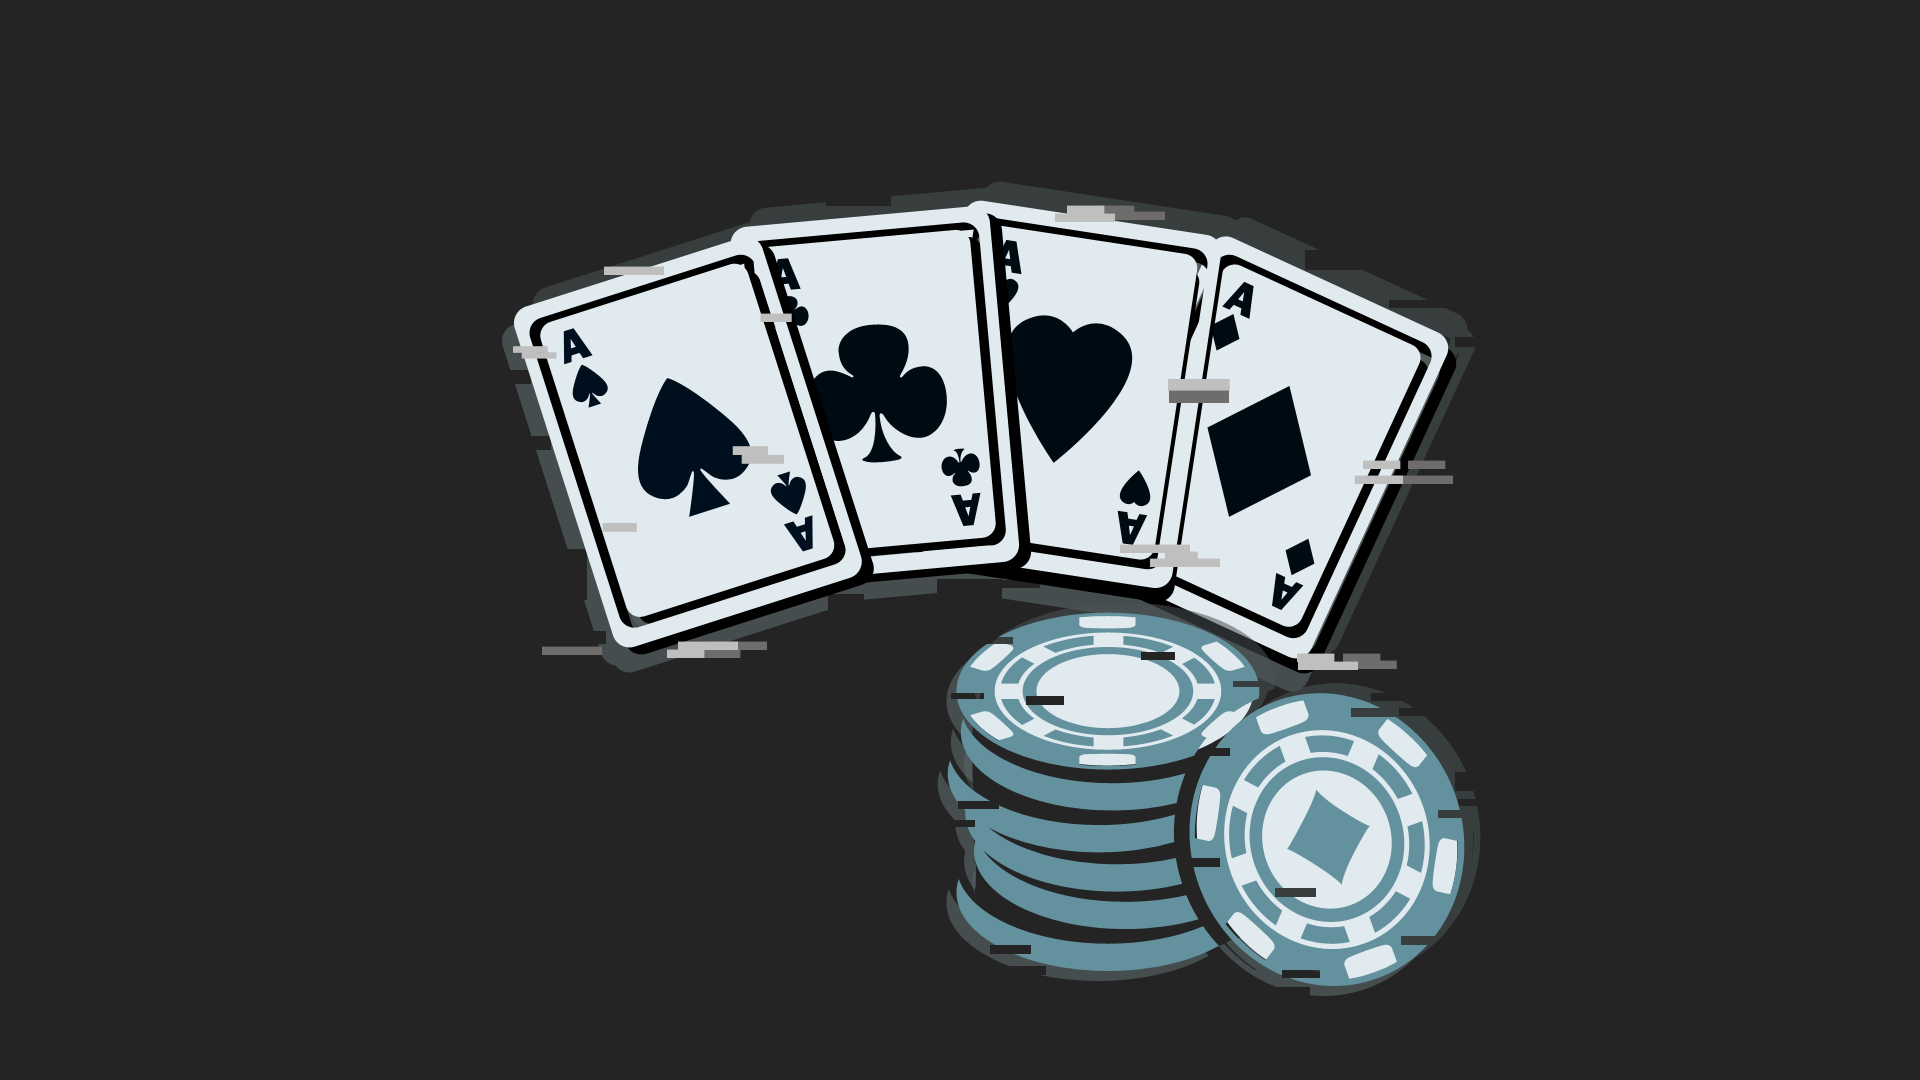 Icon for Poker Bully